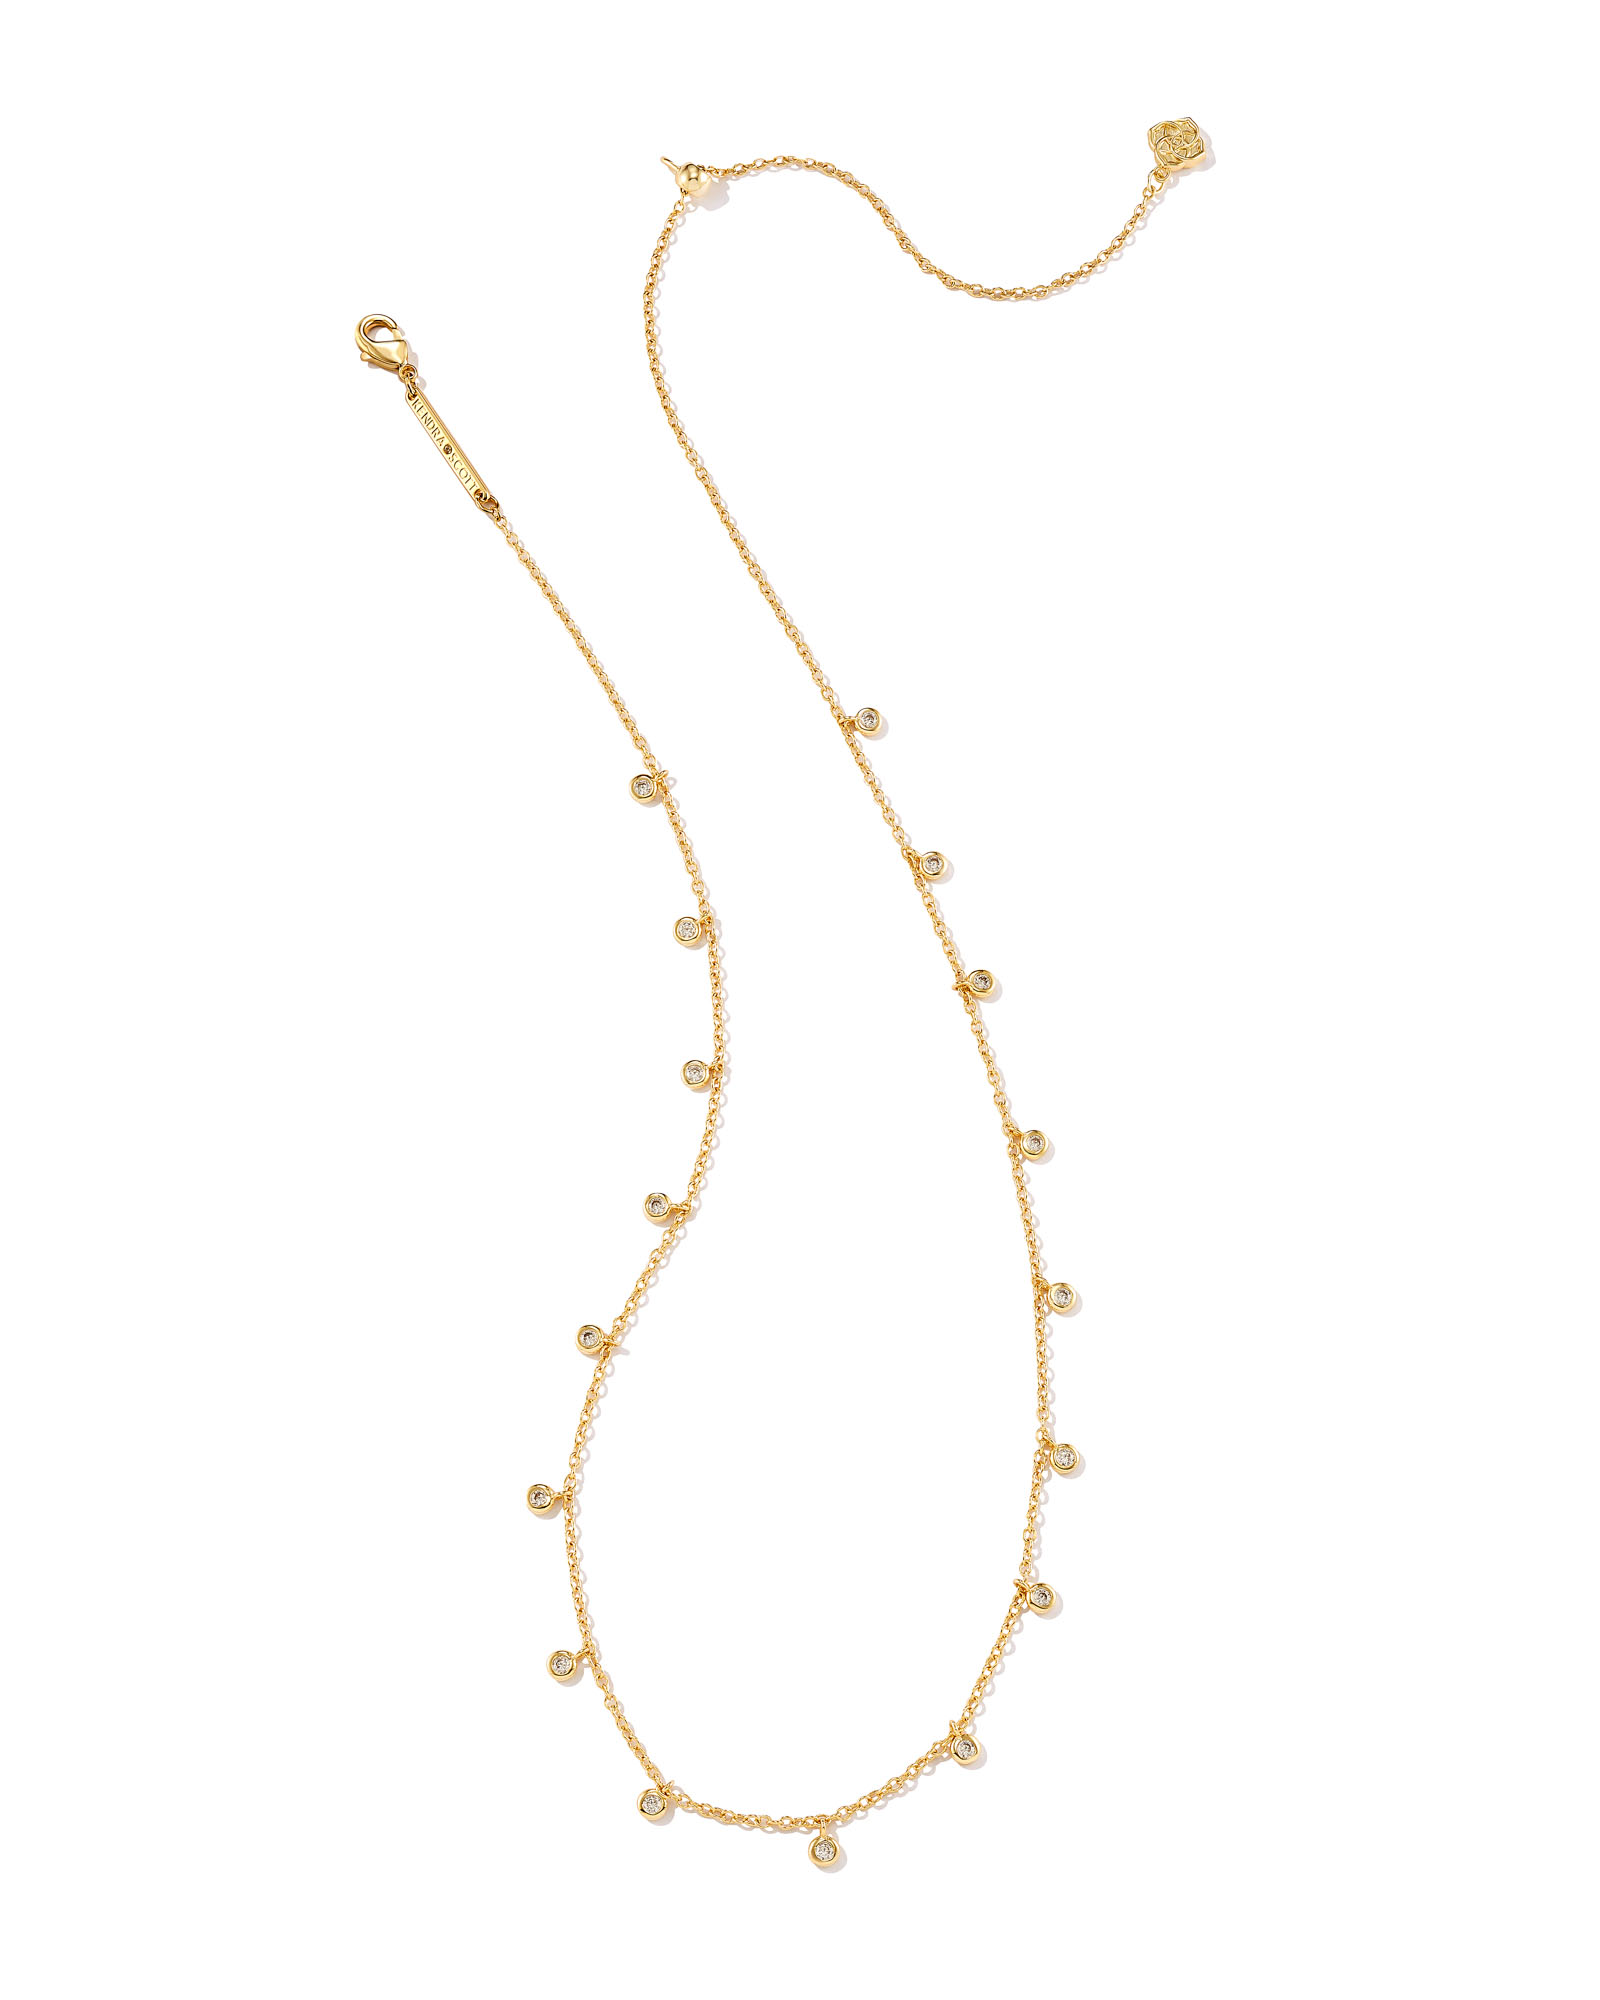 Amelia Chain Necklace in Gold | Kendra Scott